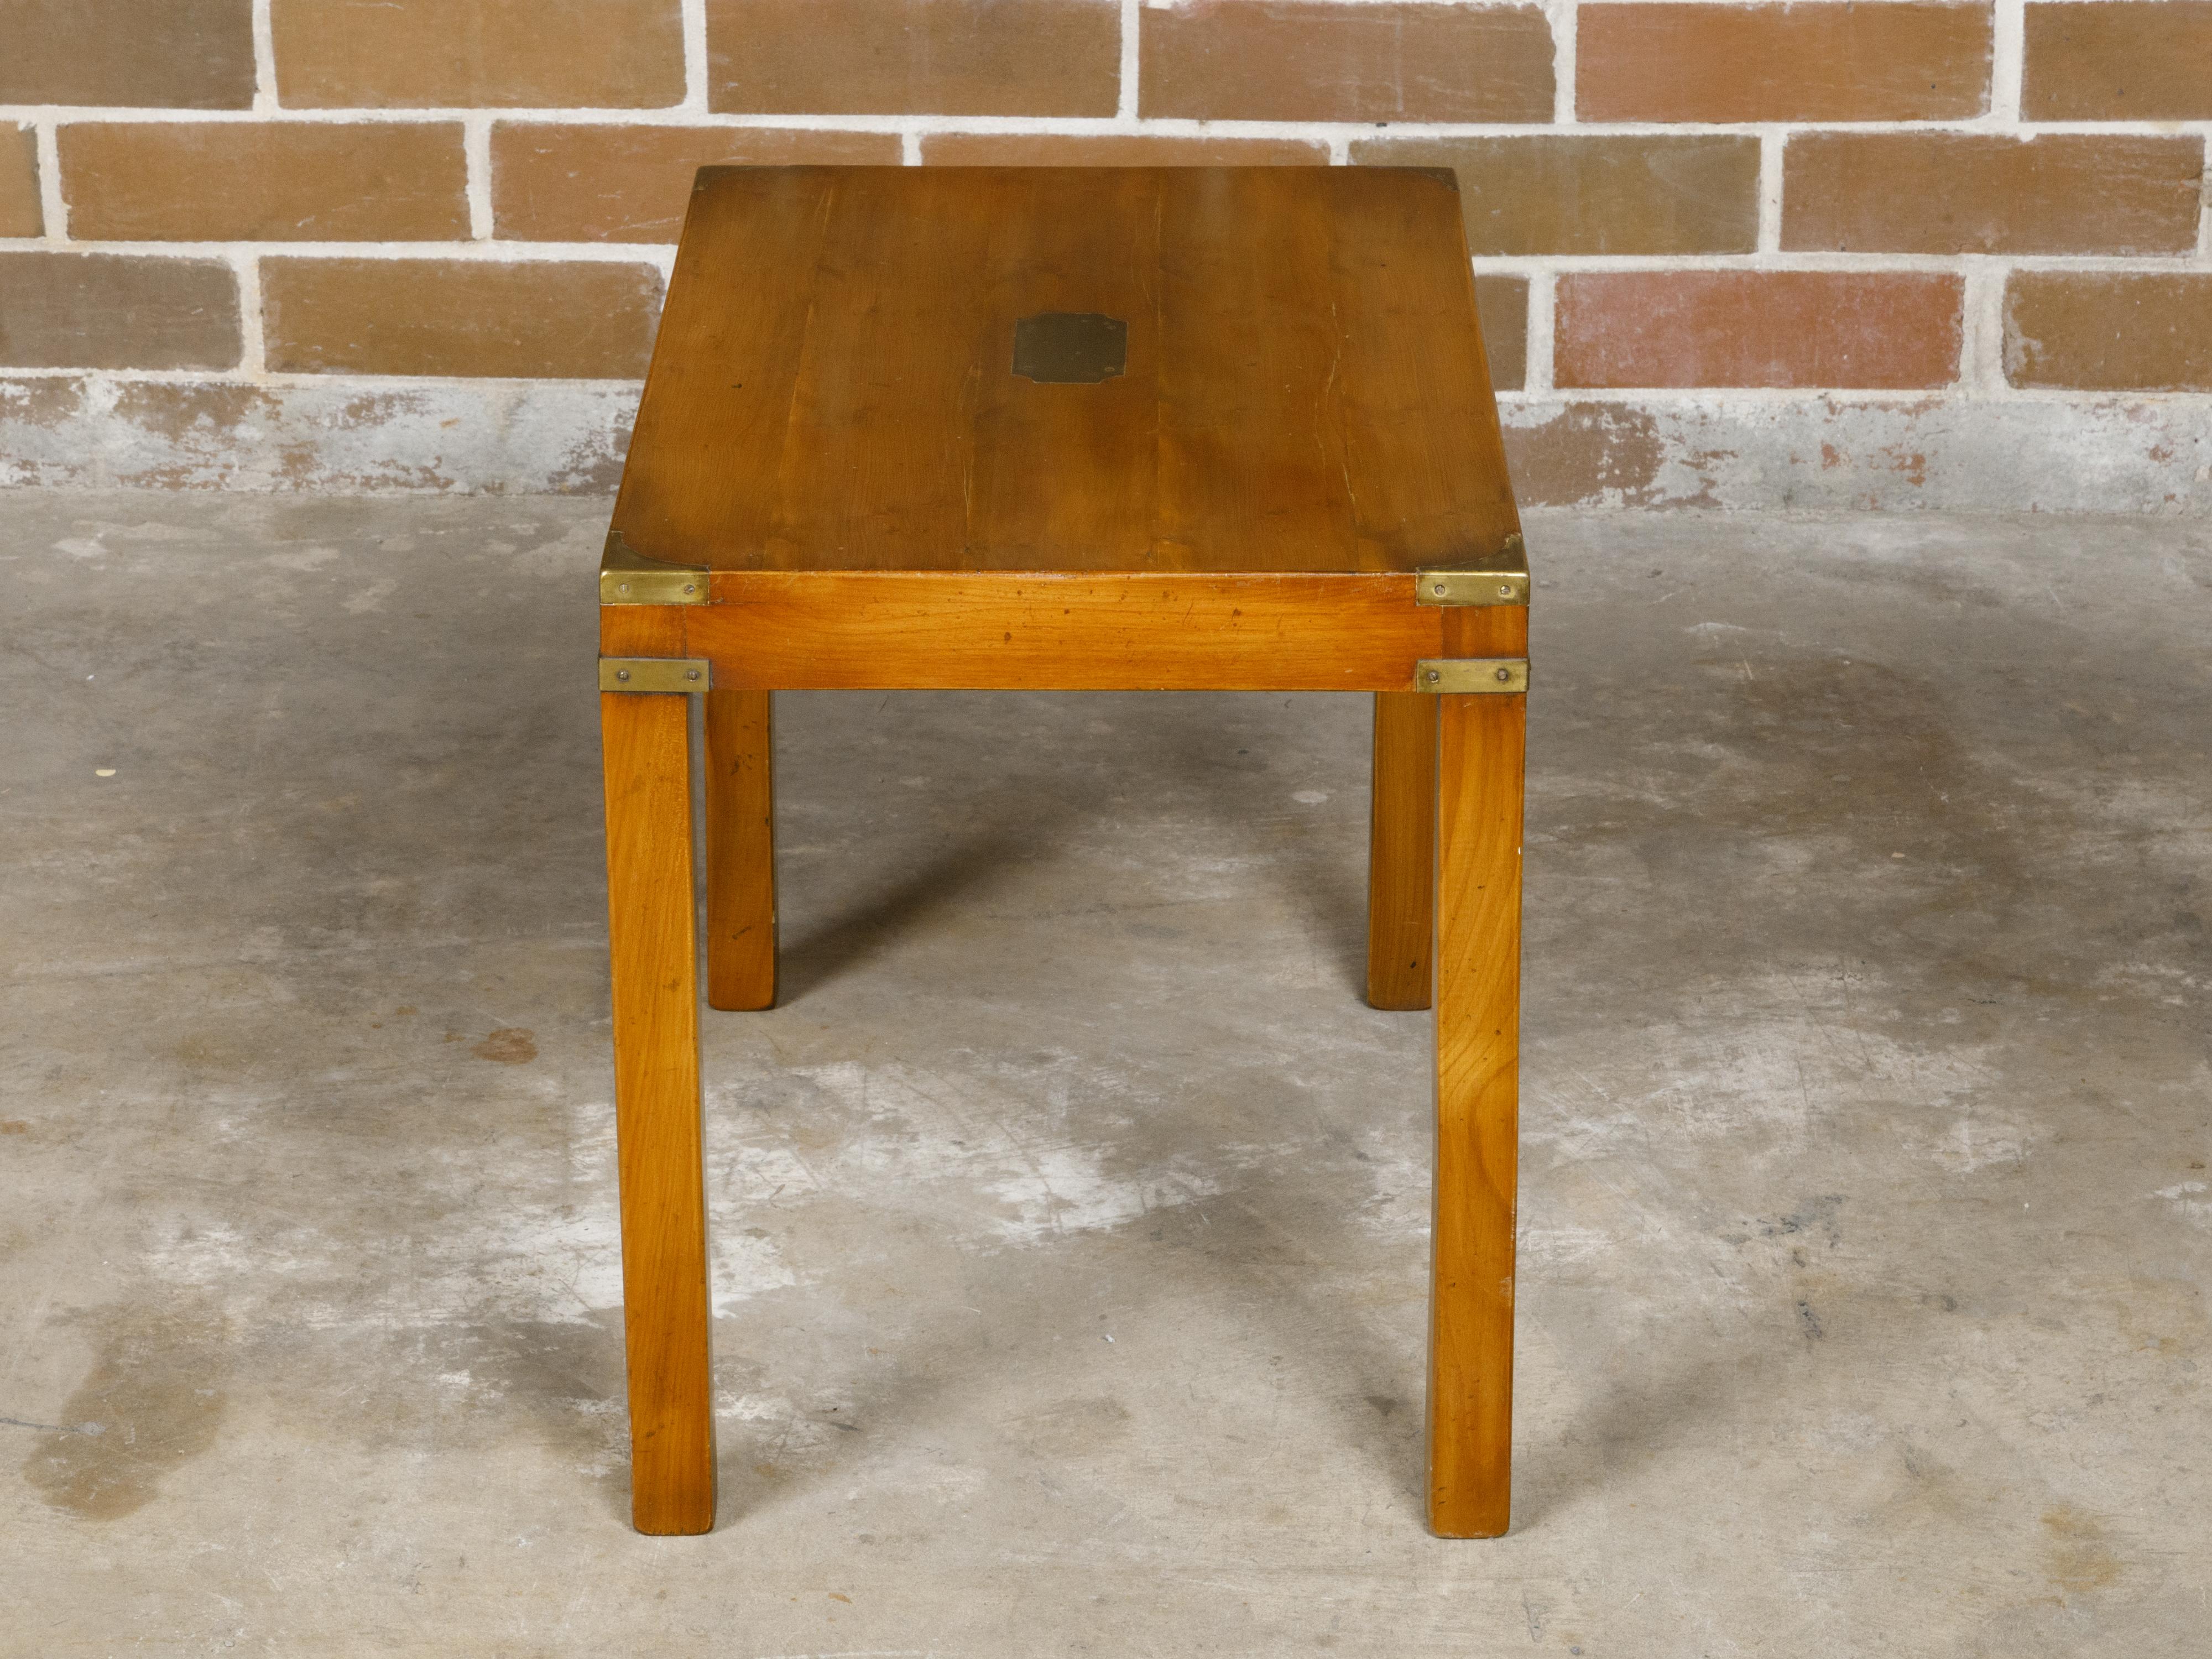 English Campaign Yew Wood 1920s Side Table with Brass Accents and Straight Legs For Sale 5